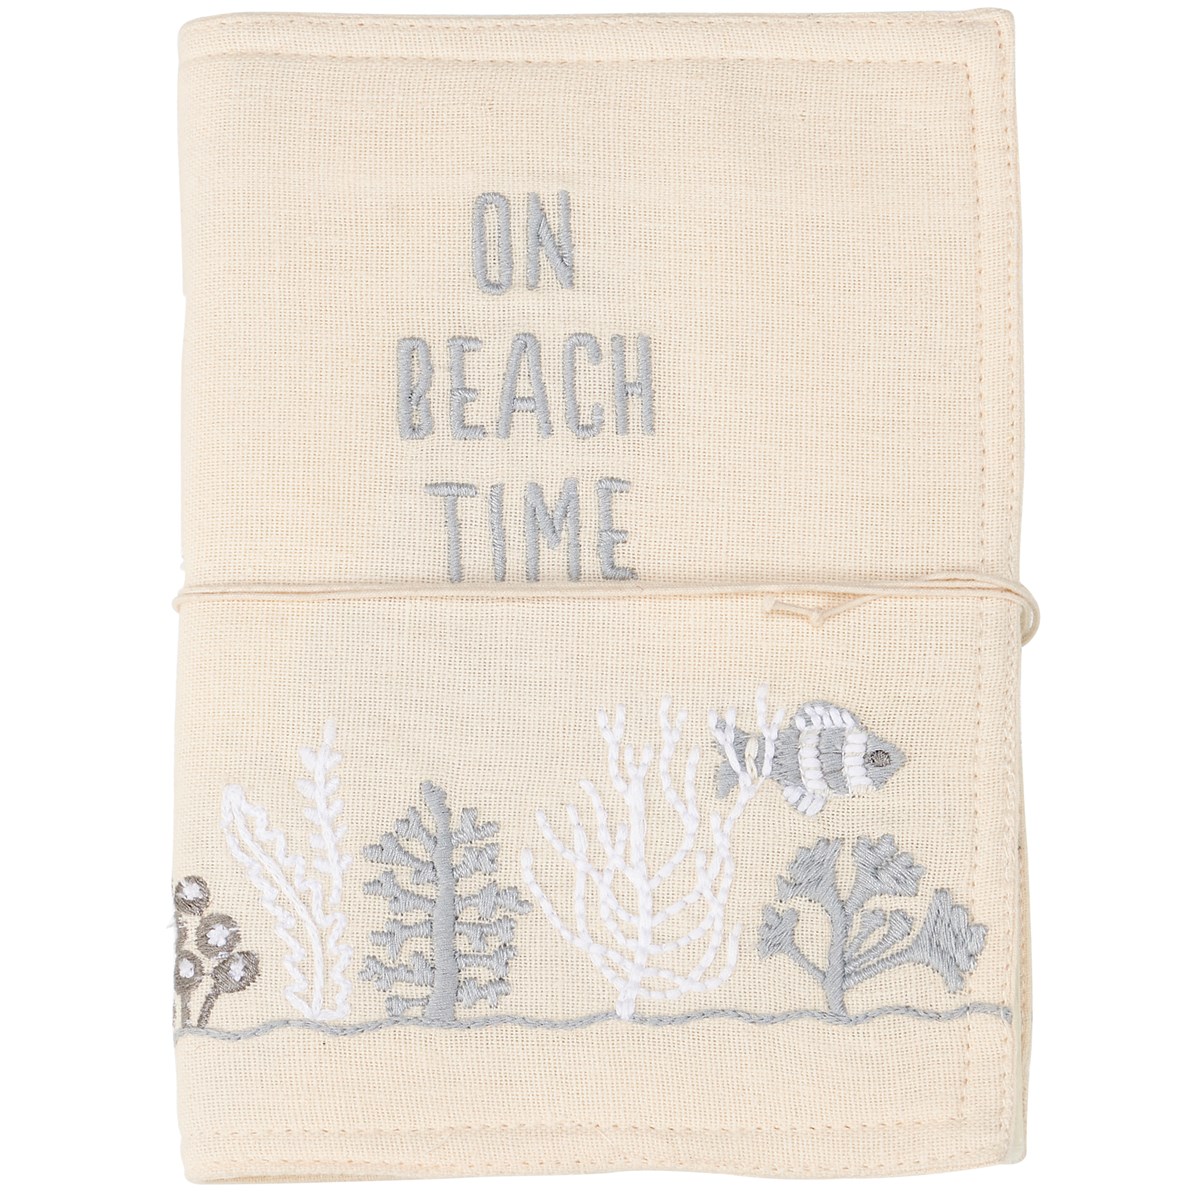 On Beach Time Journal - Cotton, Paper